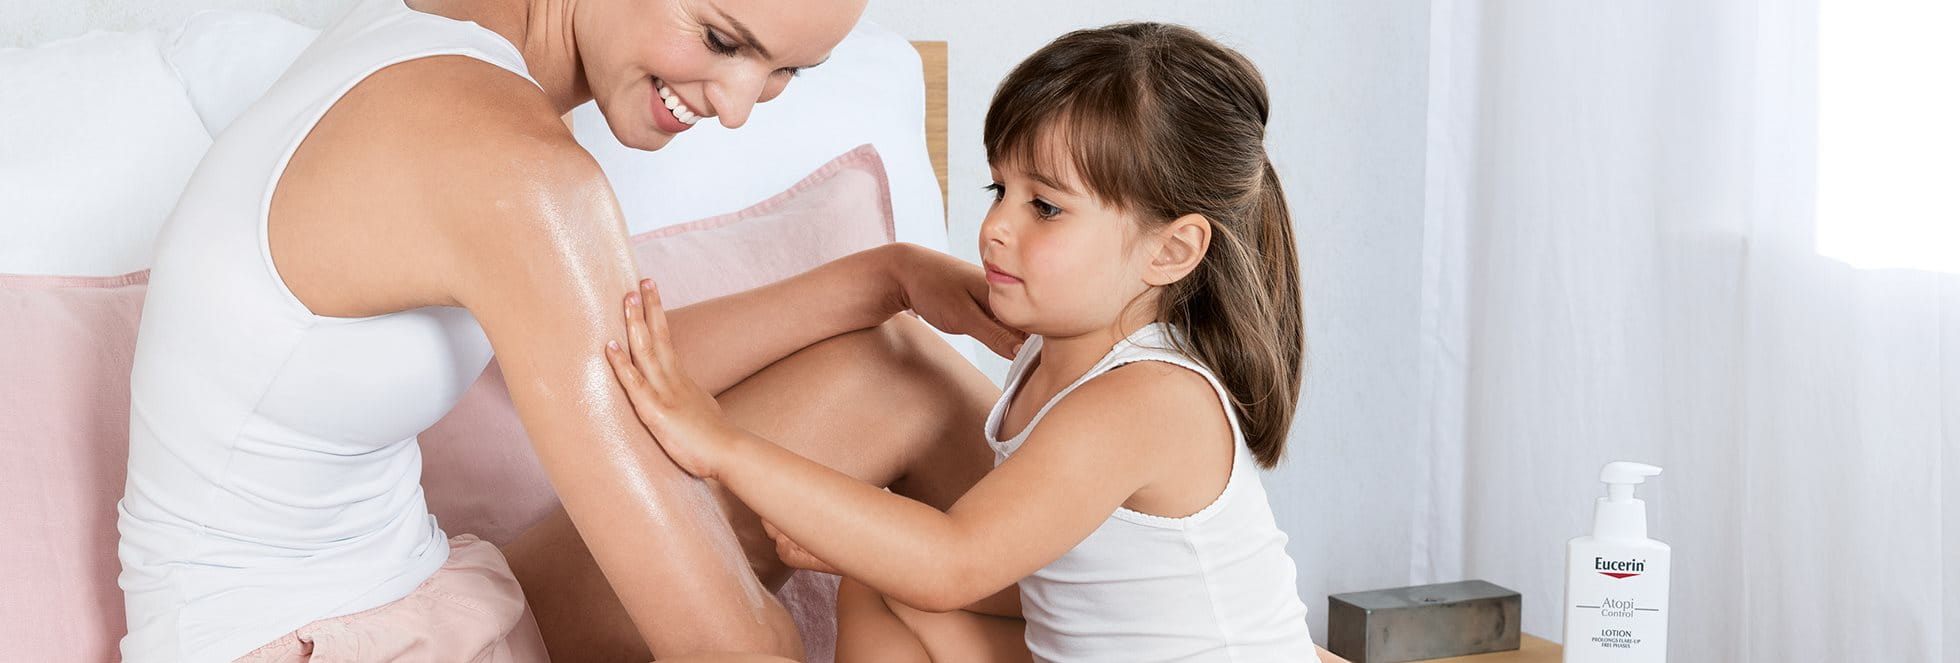 A mother and her daughter. The girl is using the Eucerin Atopi comfort creme on her mother's arm.